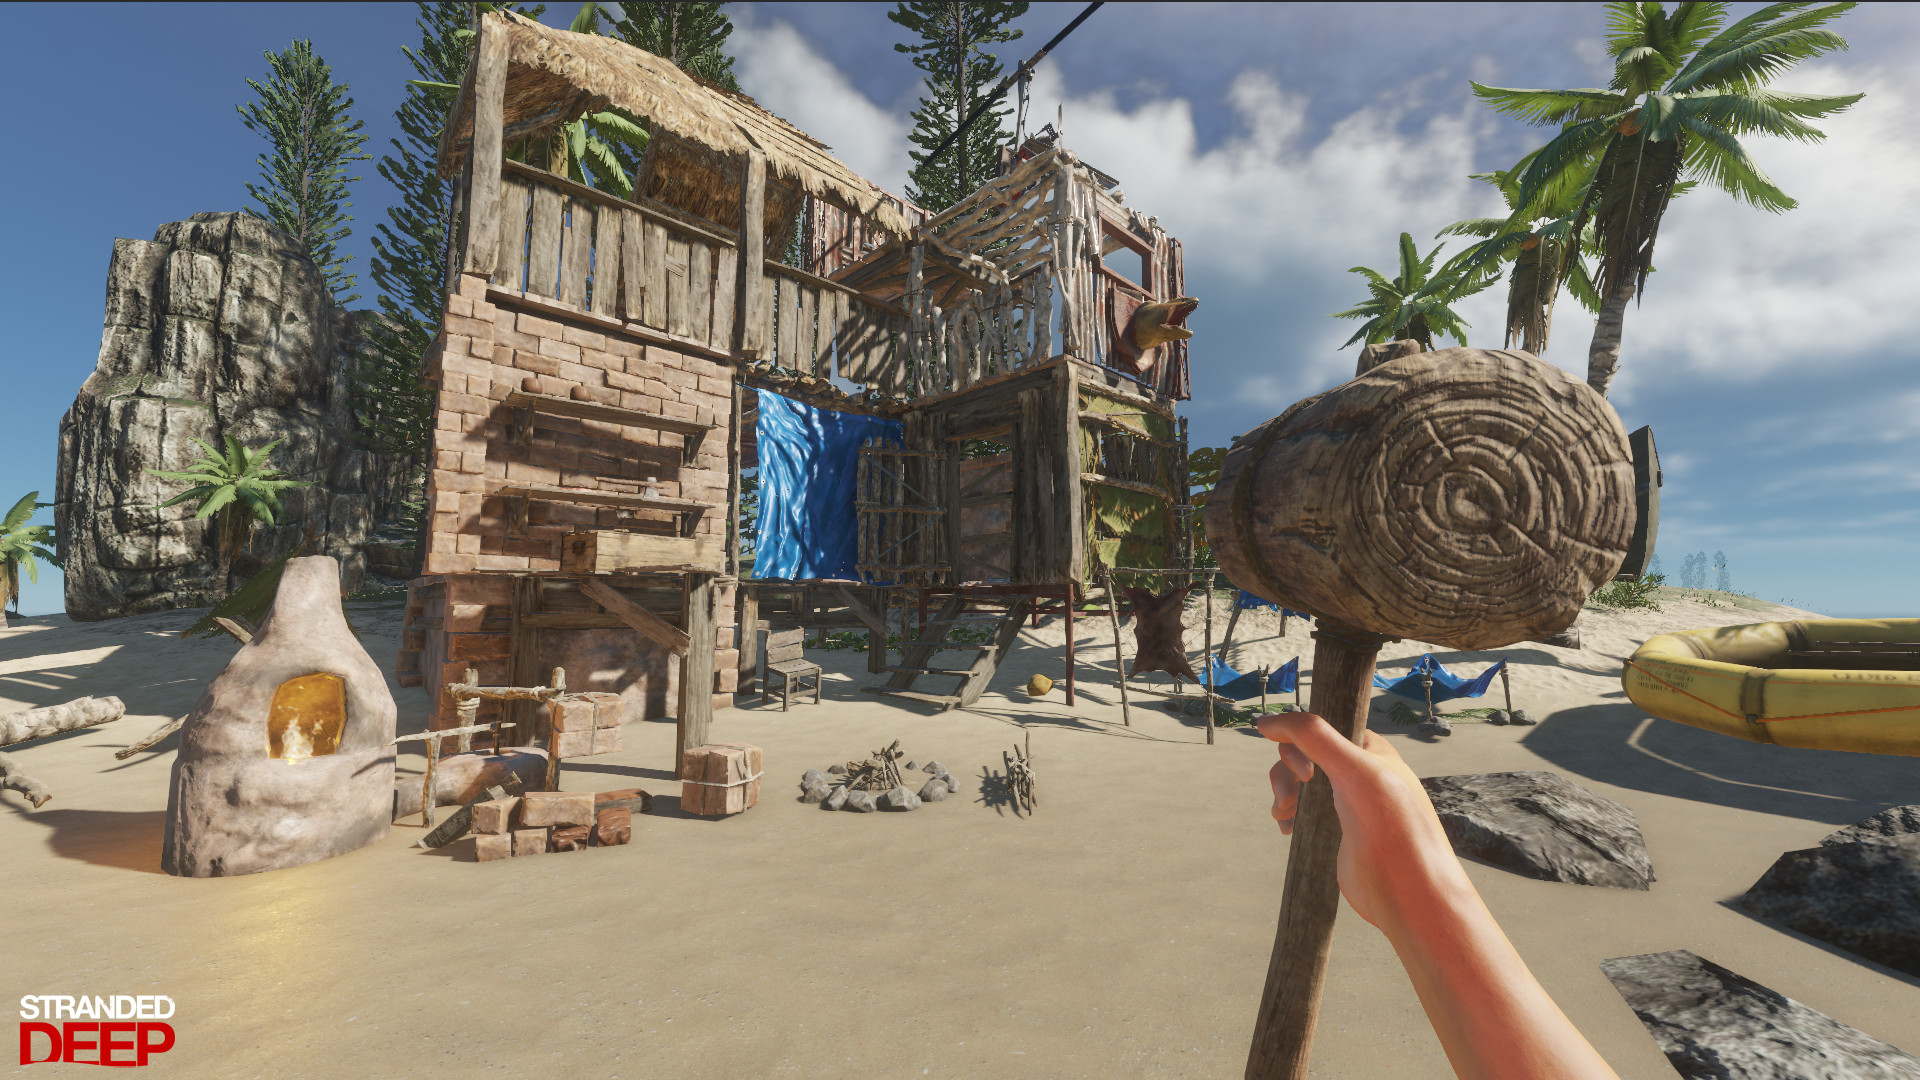 Stranded Deep PC Game Latest Version Free Download